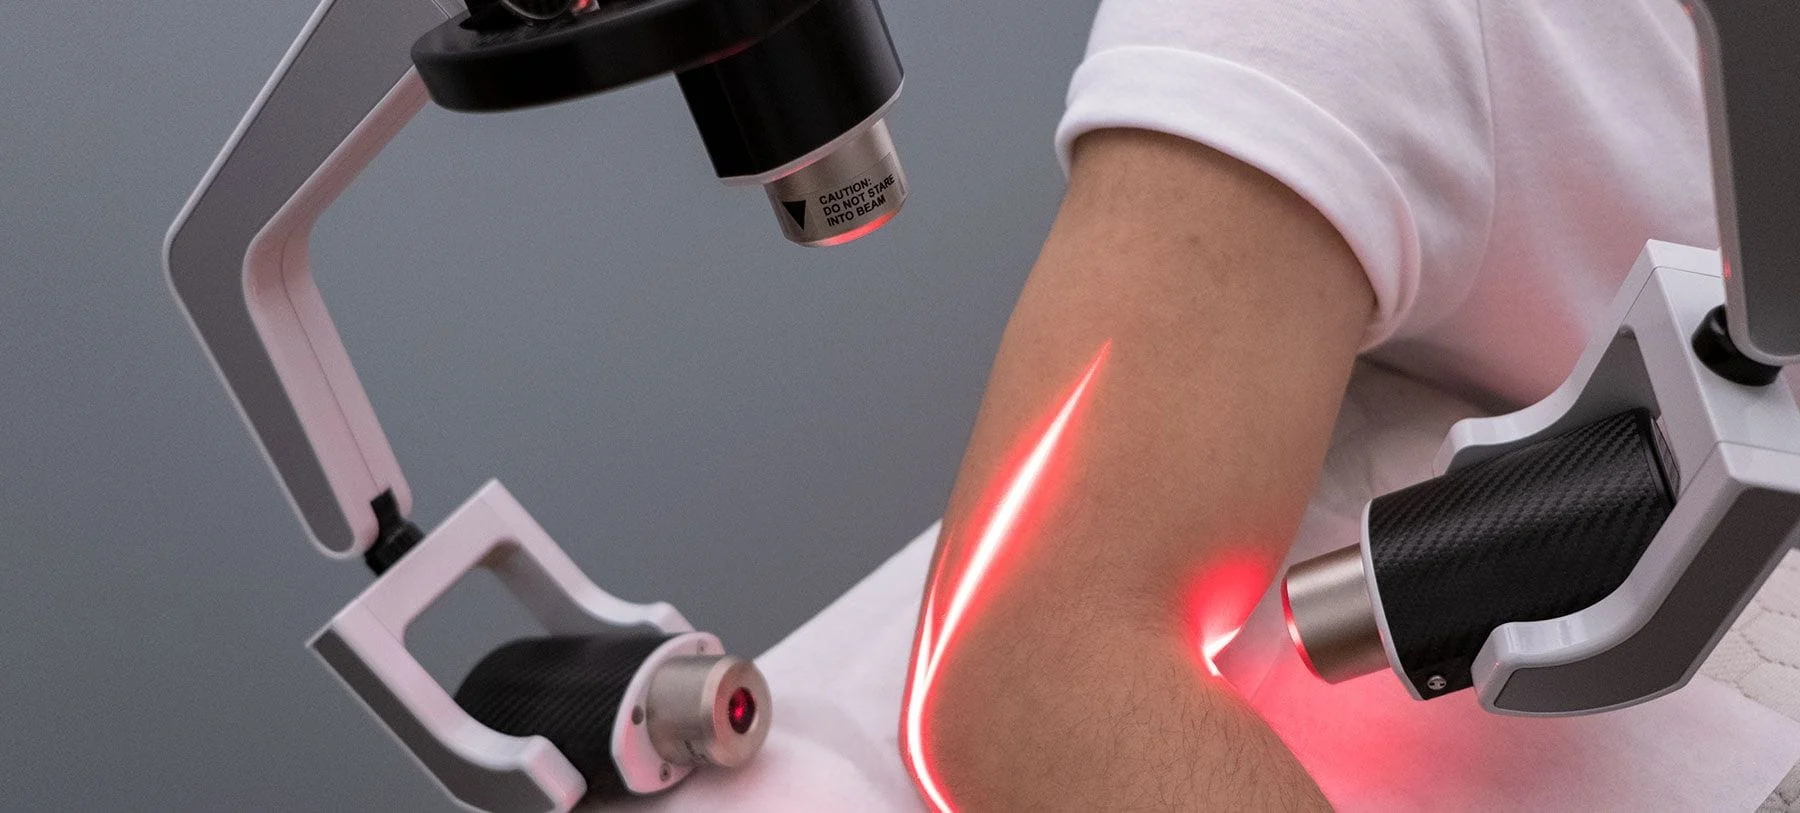 cold laser therapy in nyc provided by dr shoshany and expert medical staff